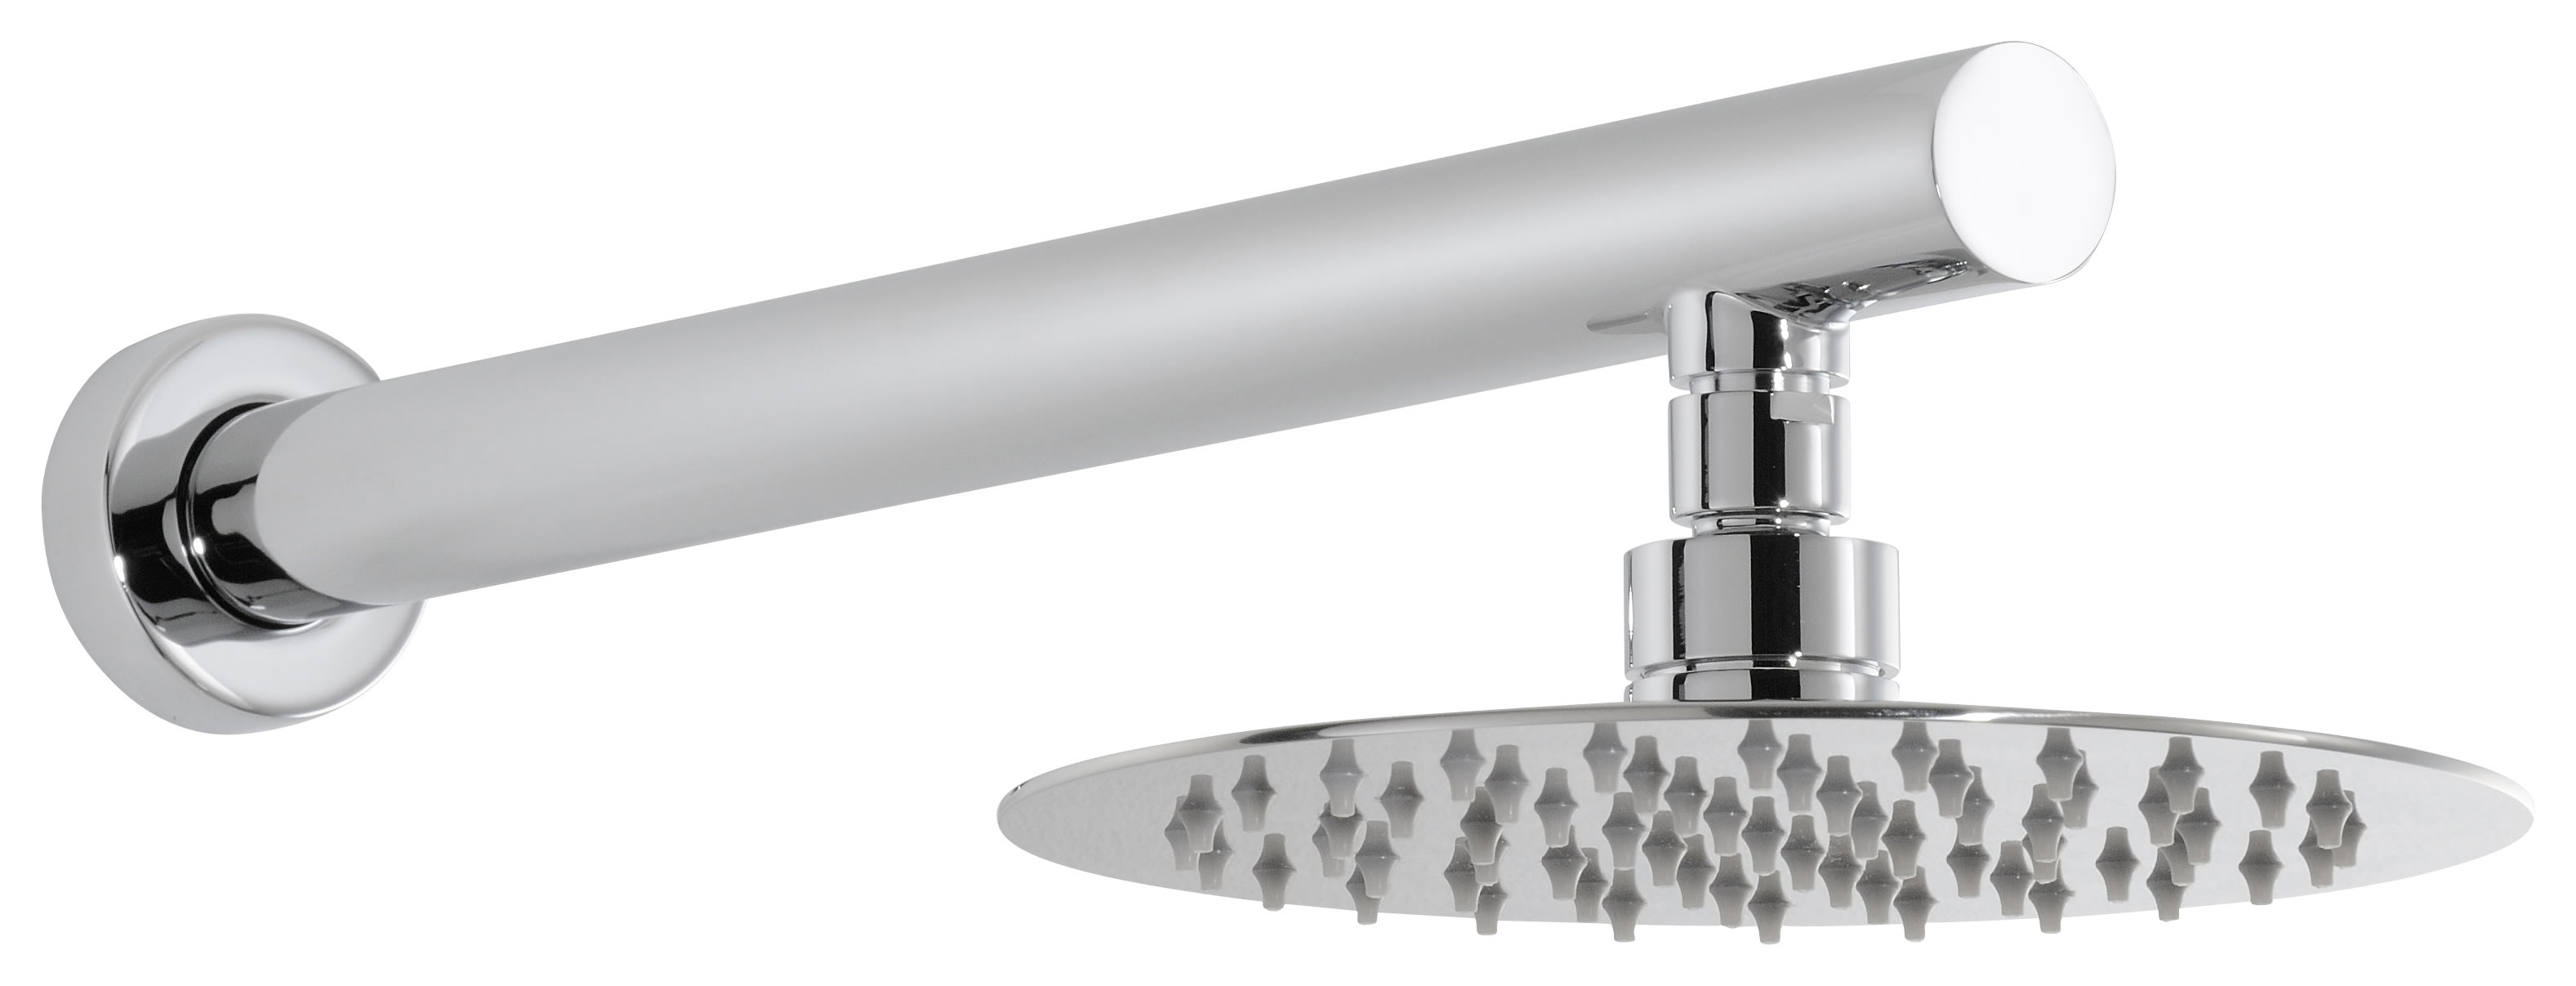 Abode Storm Chrome Wall Mounted Round Shower Head